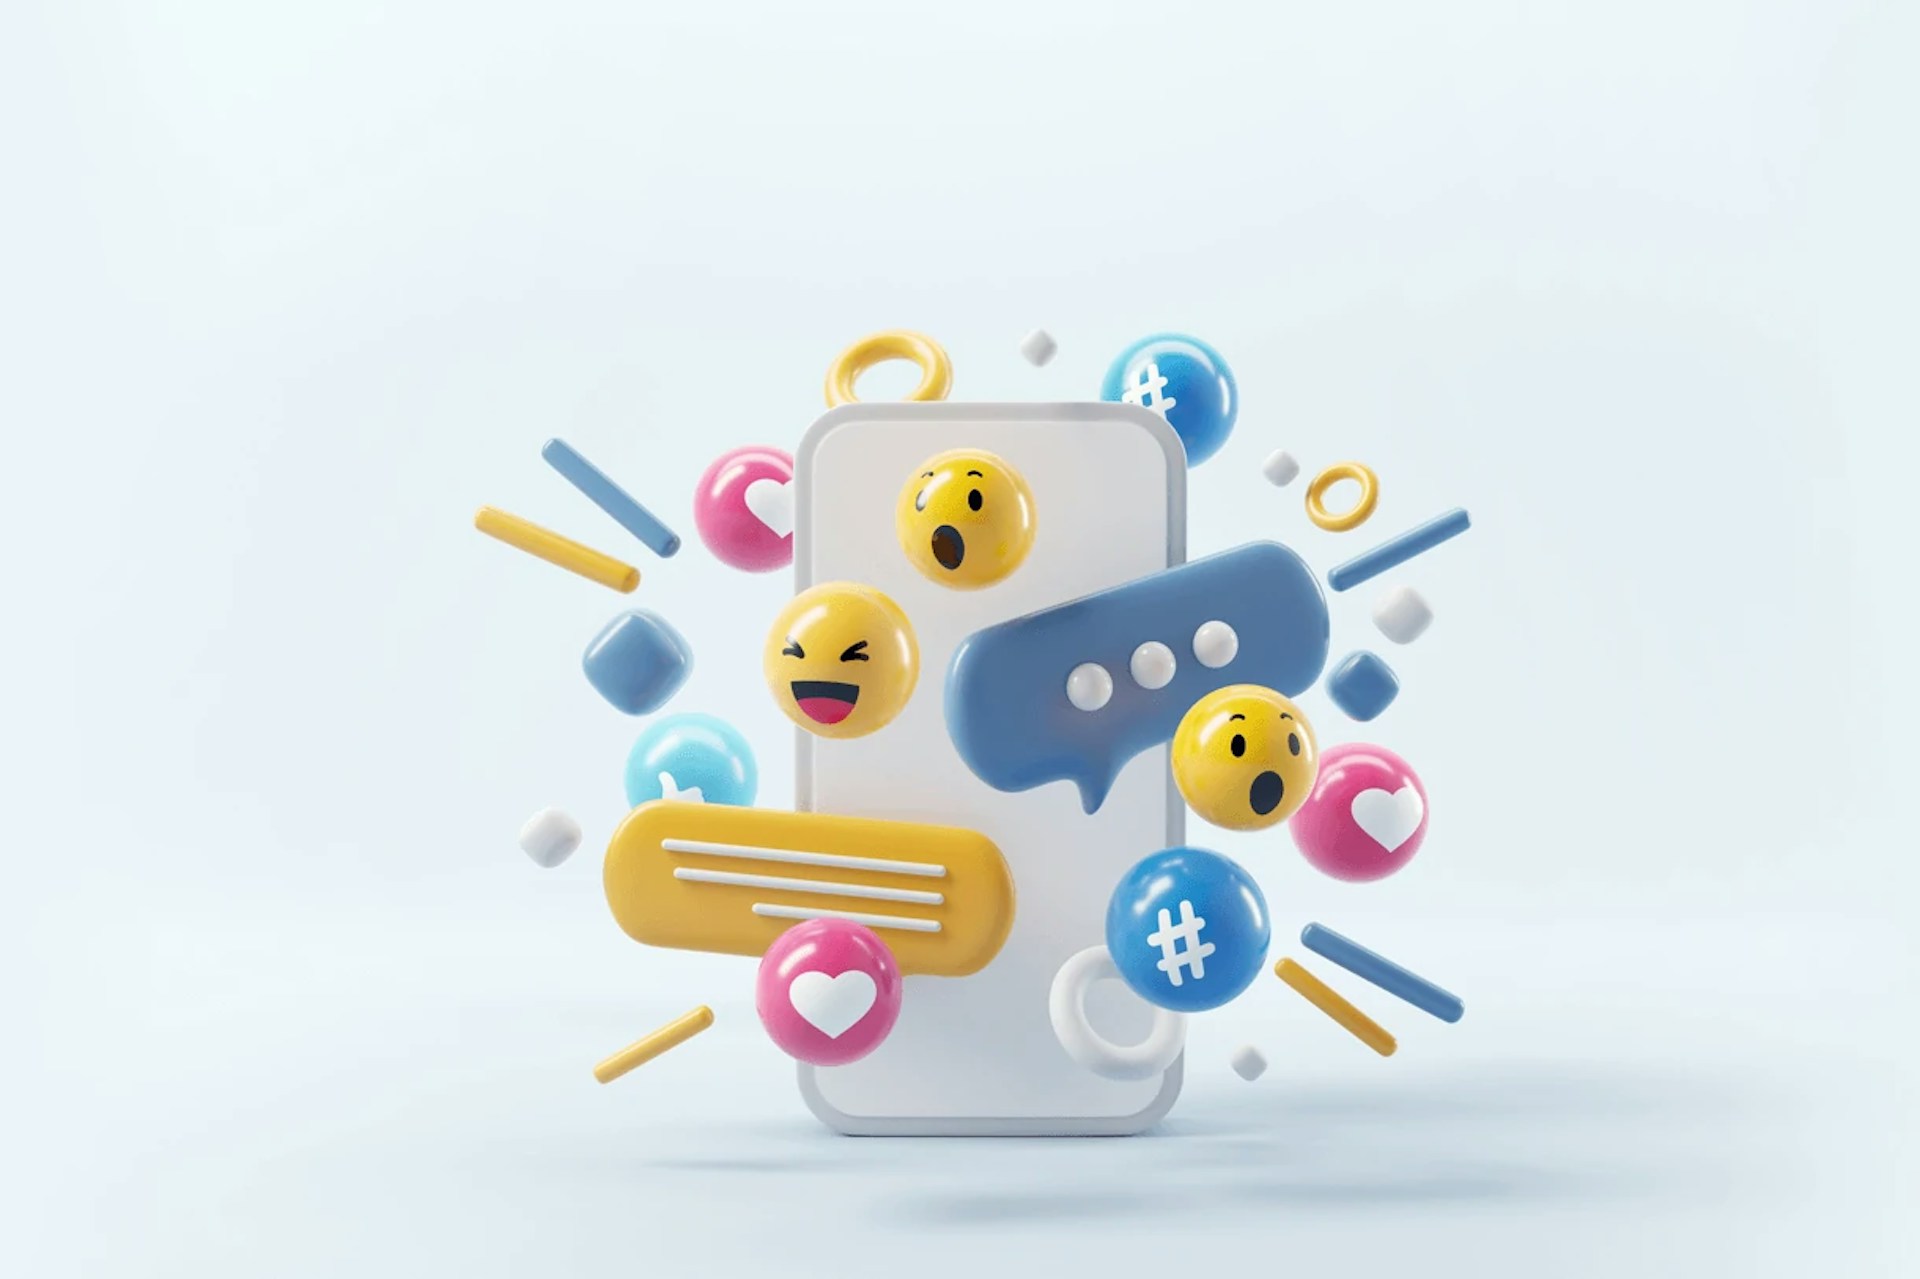 Illustration of social media icons coming out of a smartphone